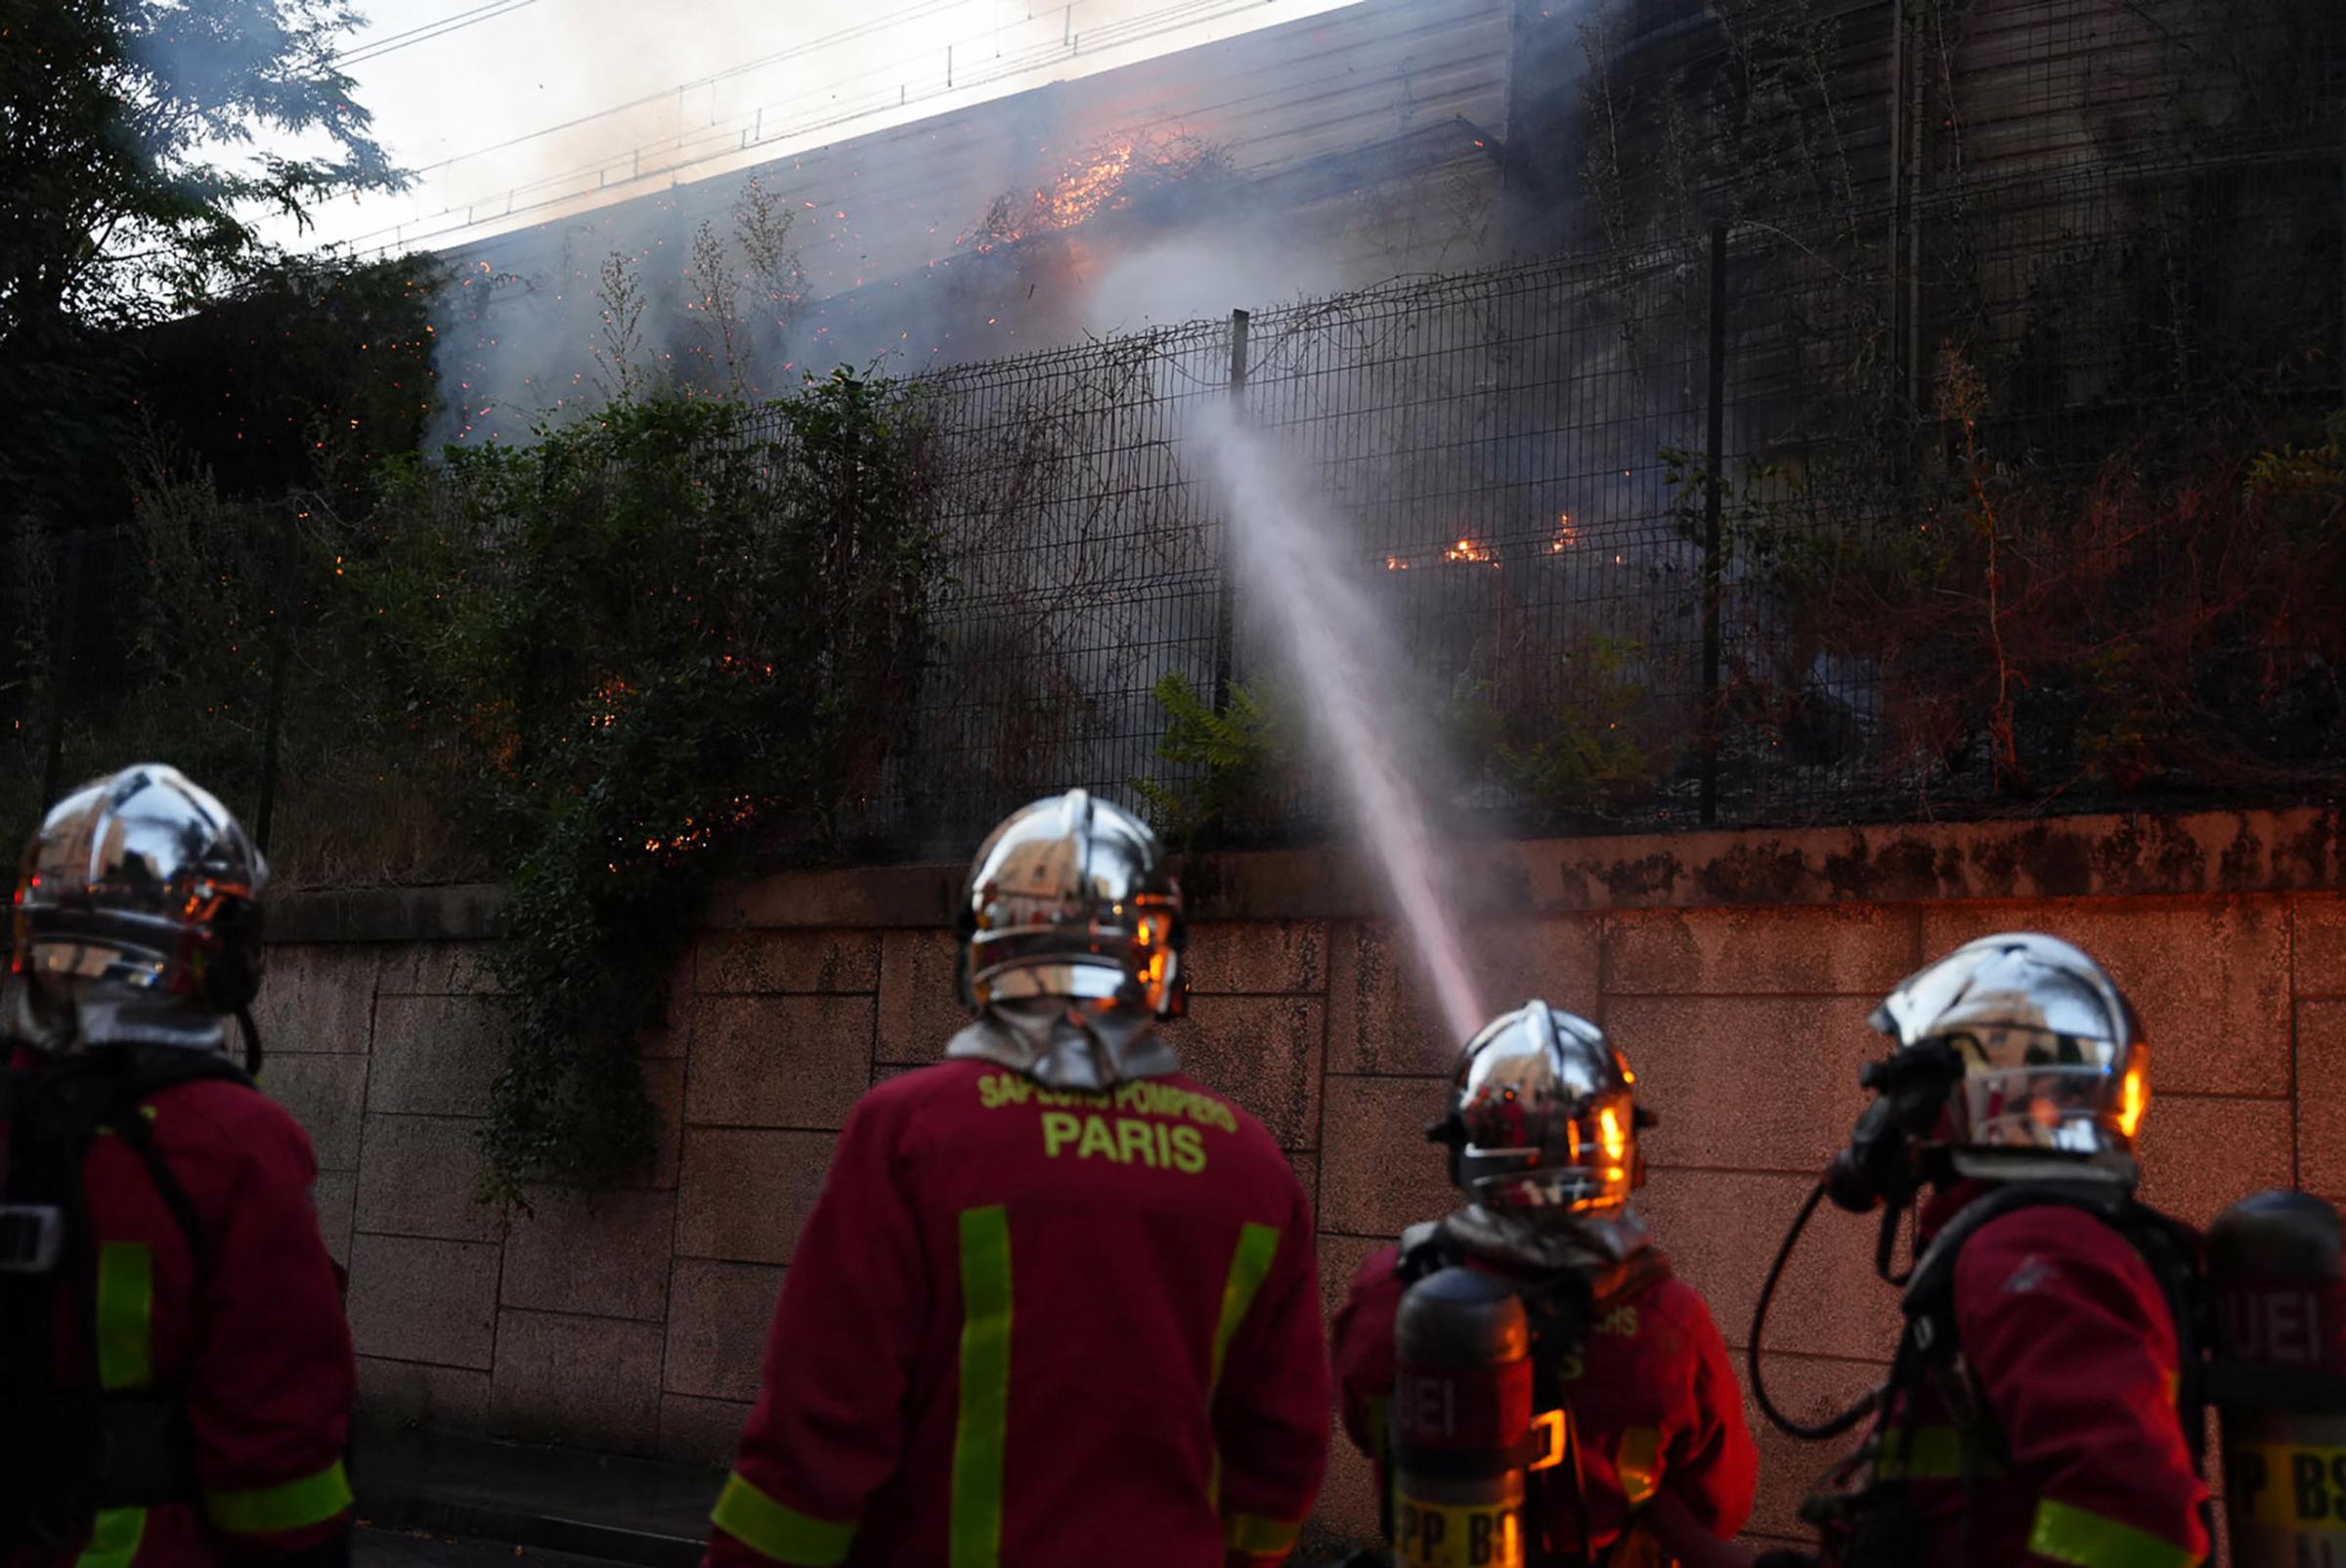 Firefighters work to put out a fire on the sidelines of a demonstration in Nanterre